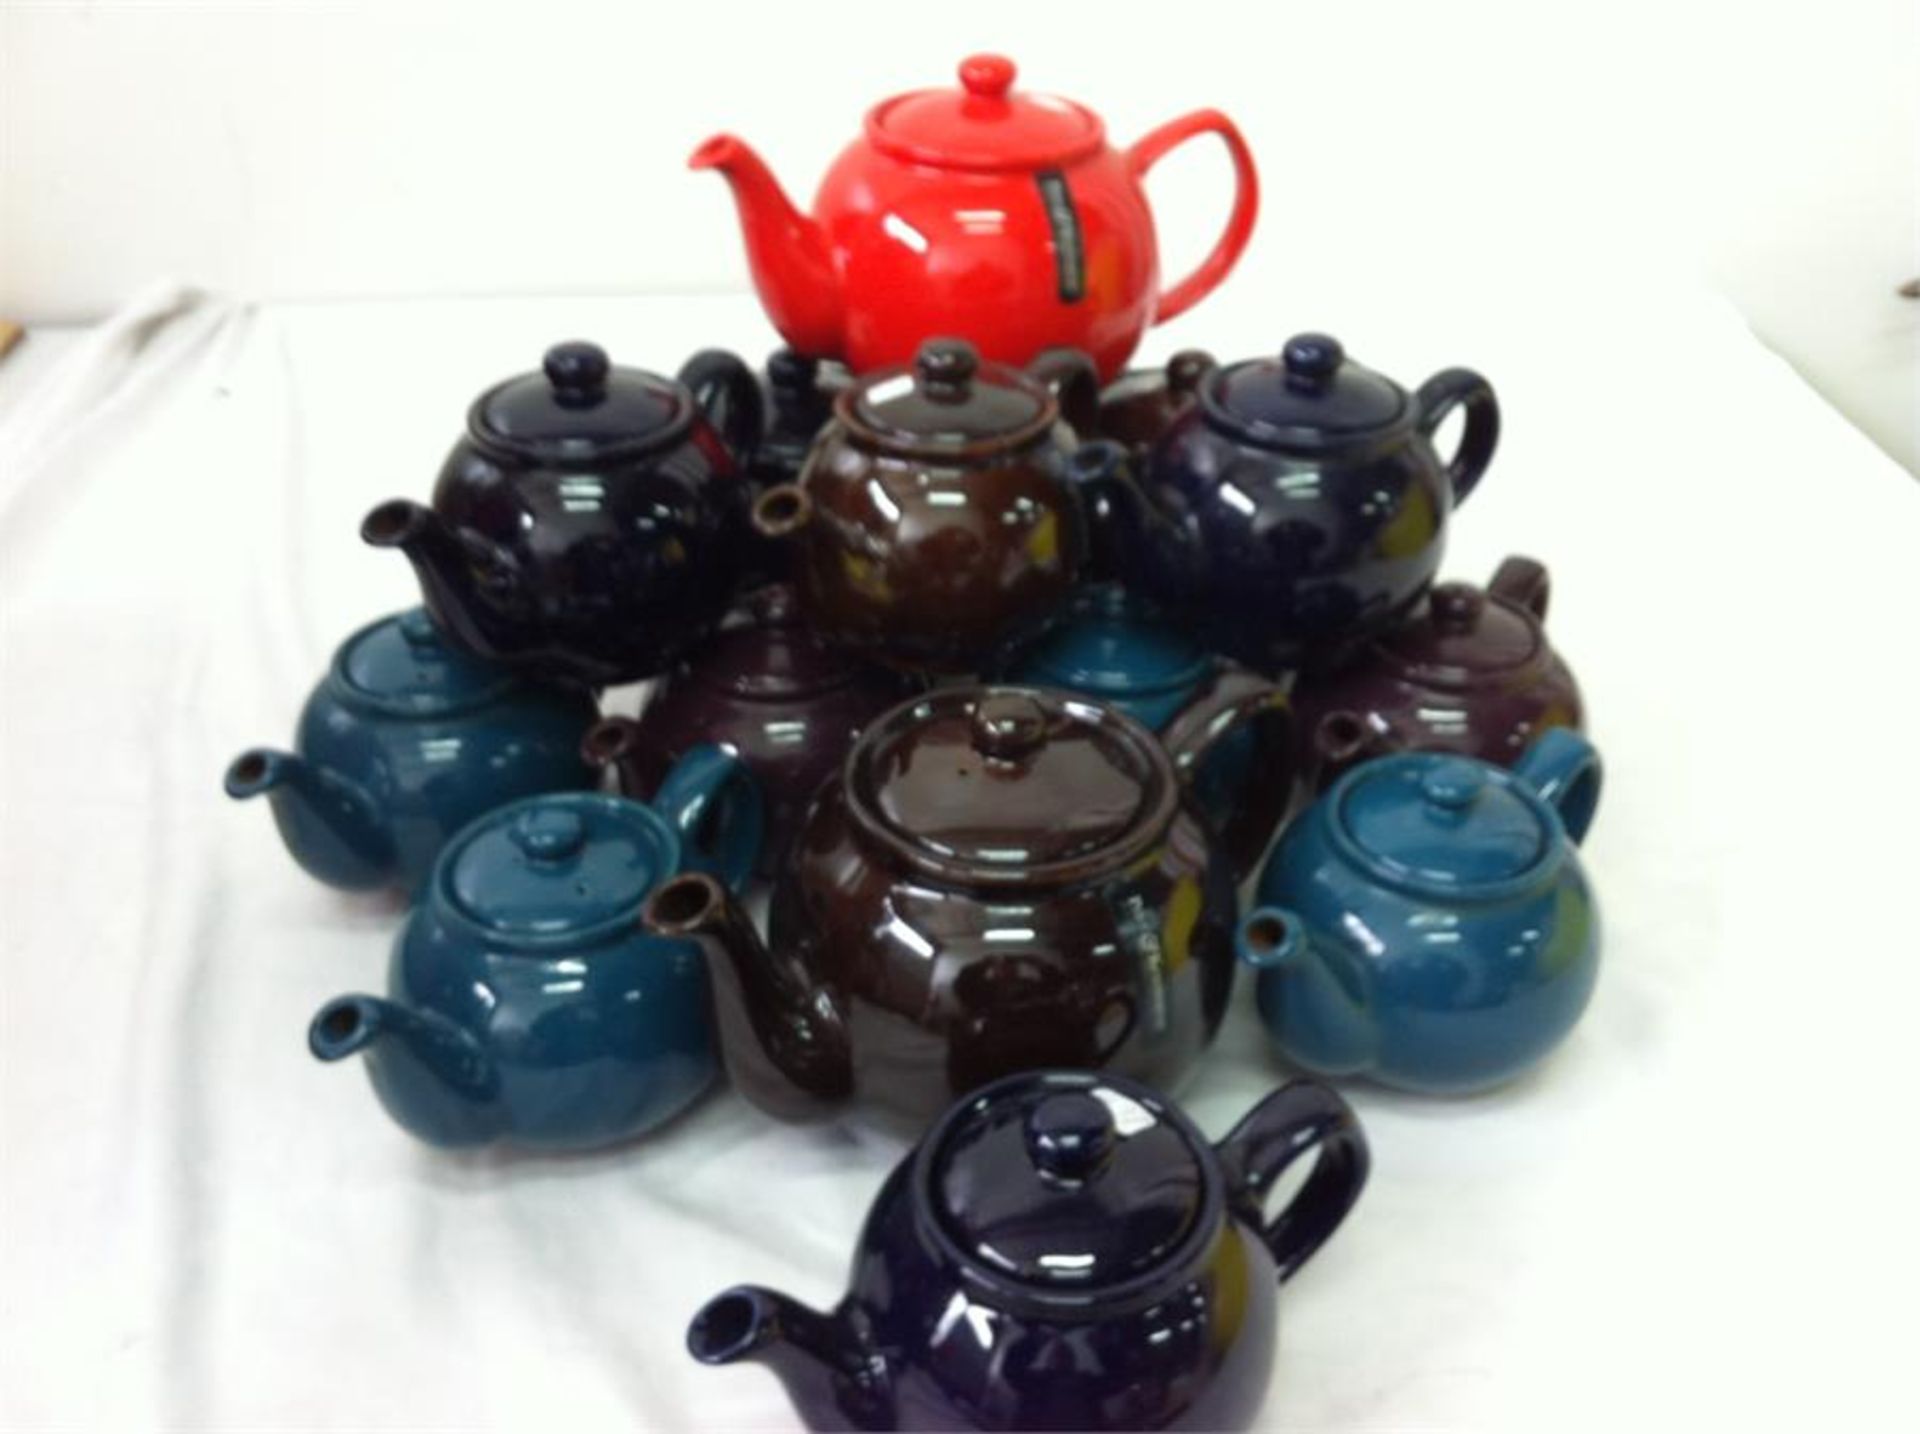 20 small and 6 large ceramic teapots, 3 blue enamel coated coffee pots, 3 white ceramic jugs - Image 6 of 6